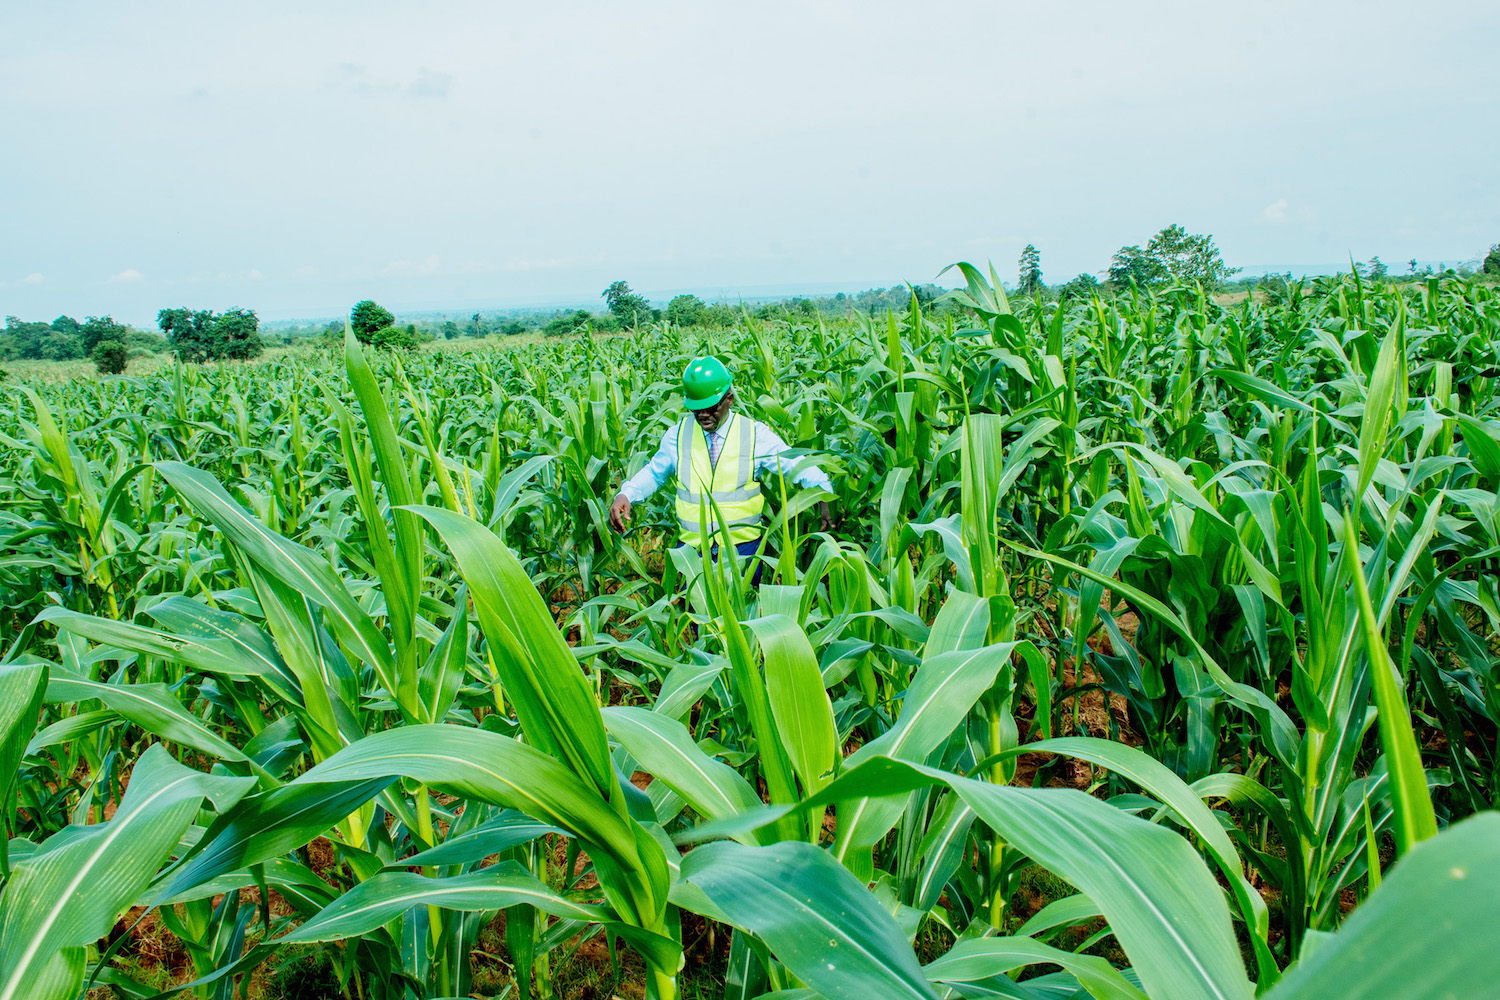 CBN moves to capture 200,000 maize farmers in Nigeria